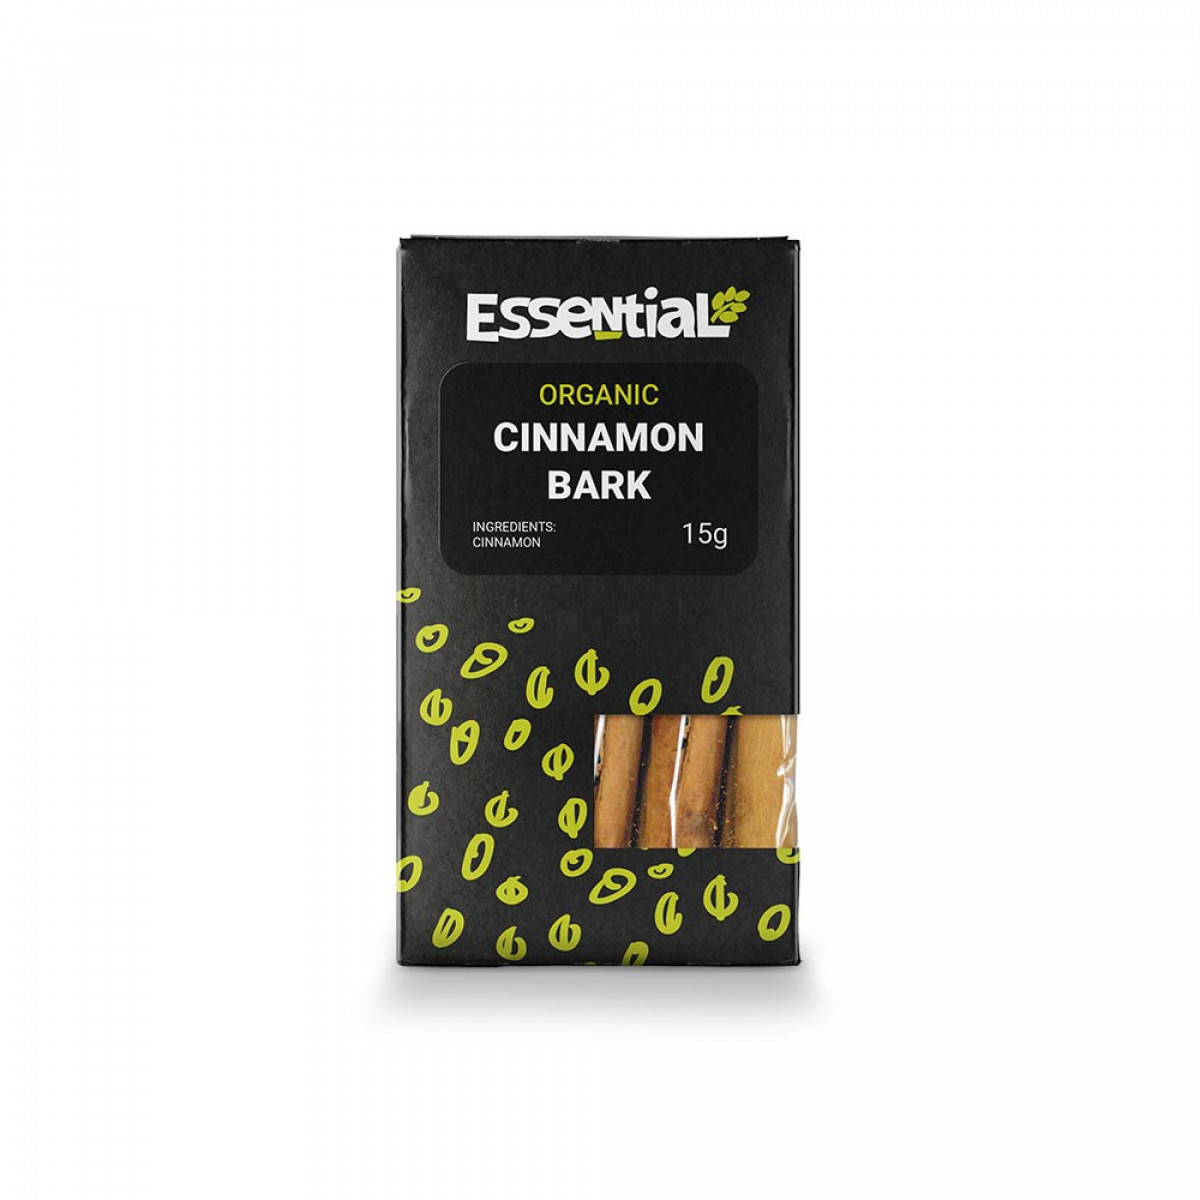 Product picture for Cinnamon Bark